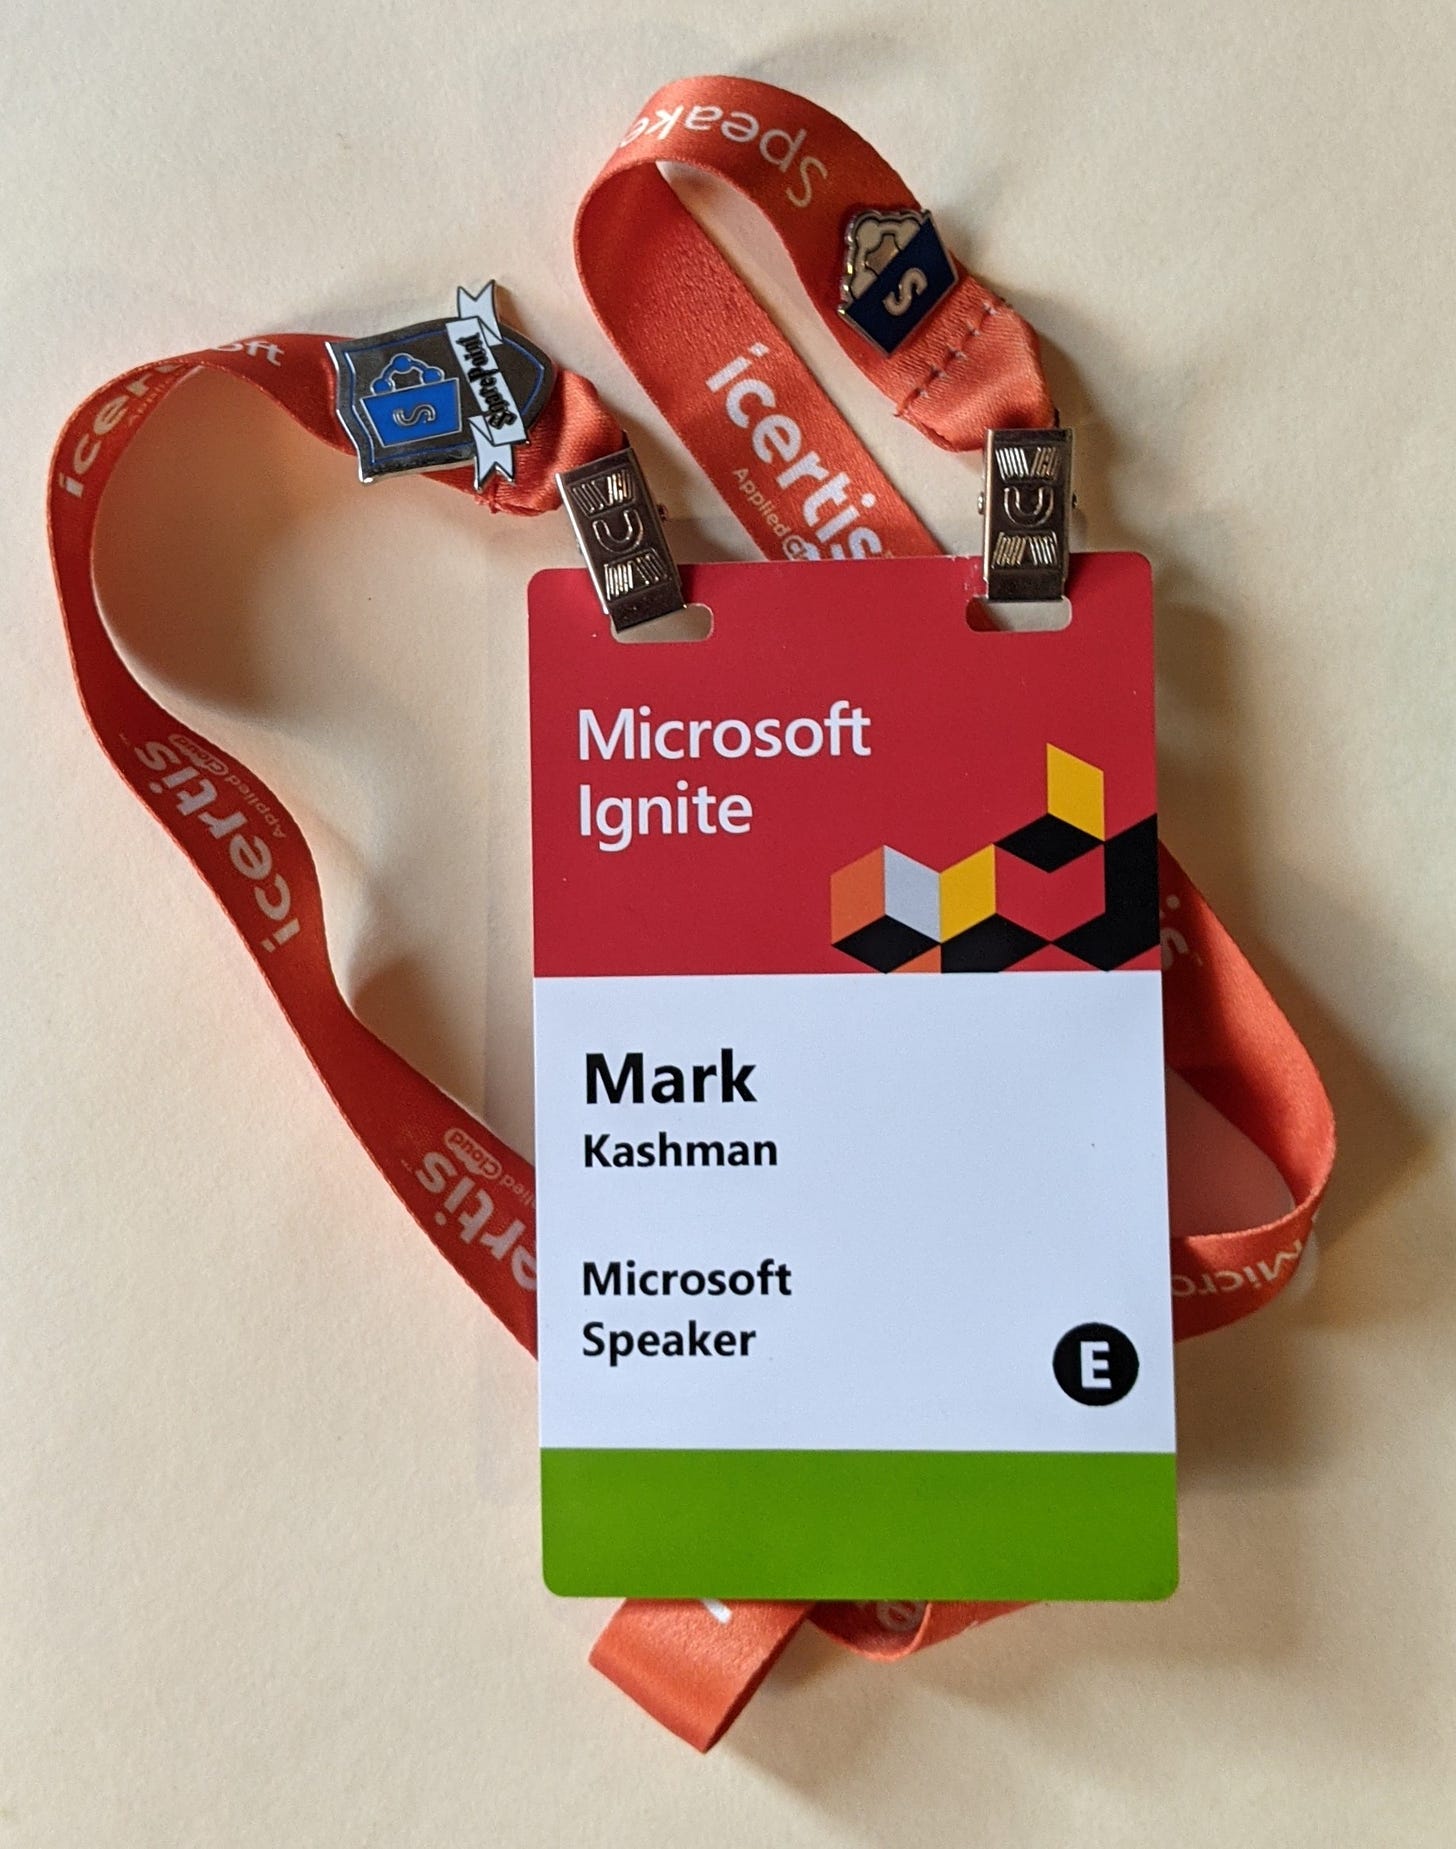 Microsoft Ignite 2019 event badge with SharePoint pins.